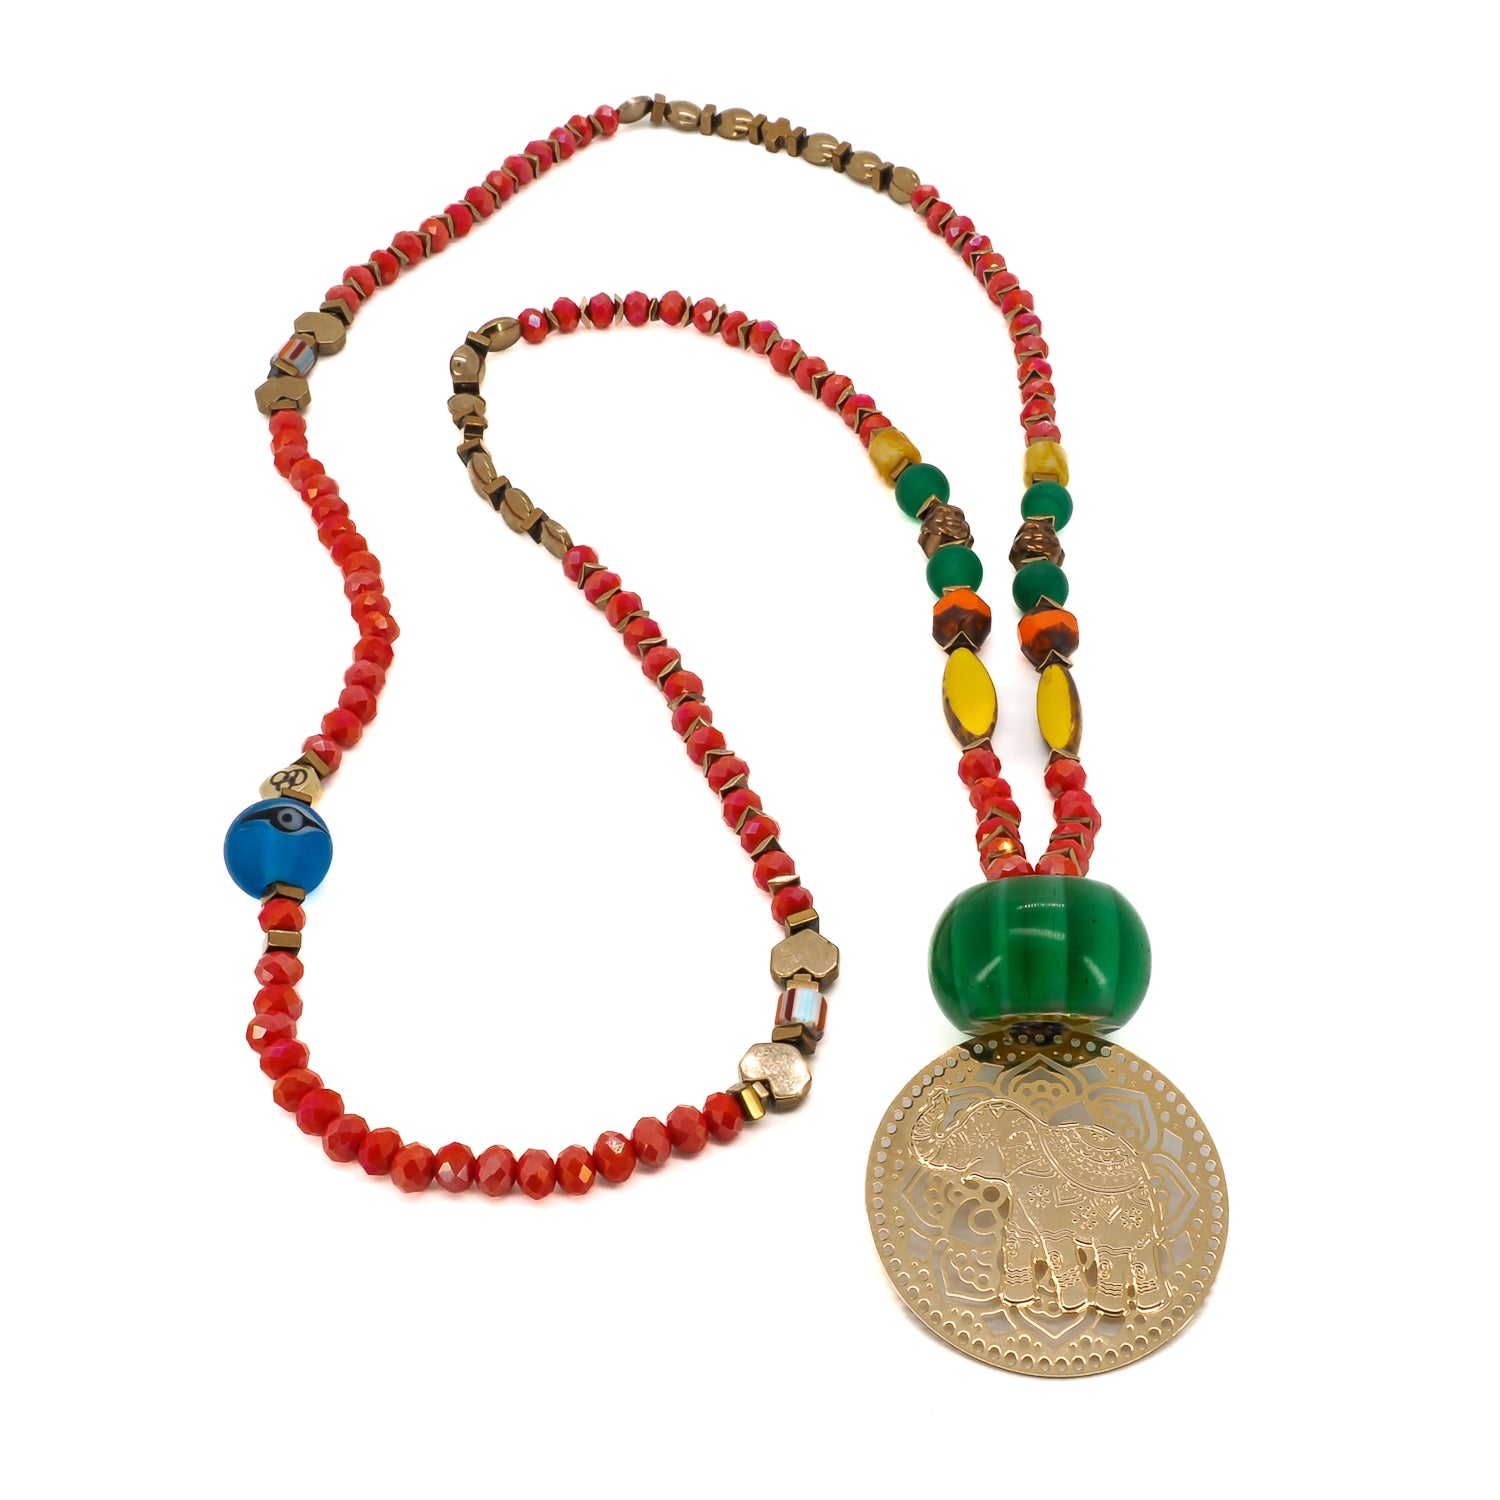 Explore the unique design of the Mystic Bohemian Elephant Necklace, featuring a colorful mix of beads, including green jade, African beads, and shimmering crystal beads, accentuated by the 18K gold-plated elephant pendant.